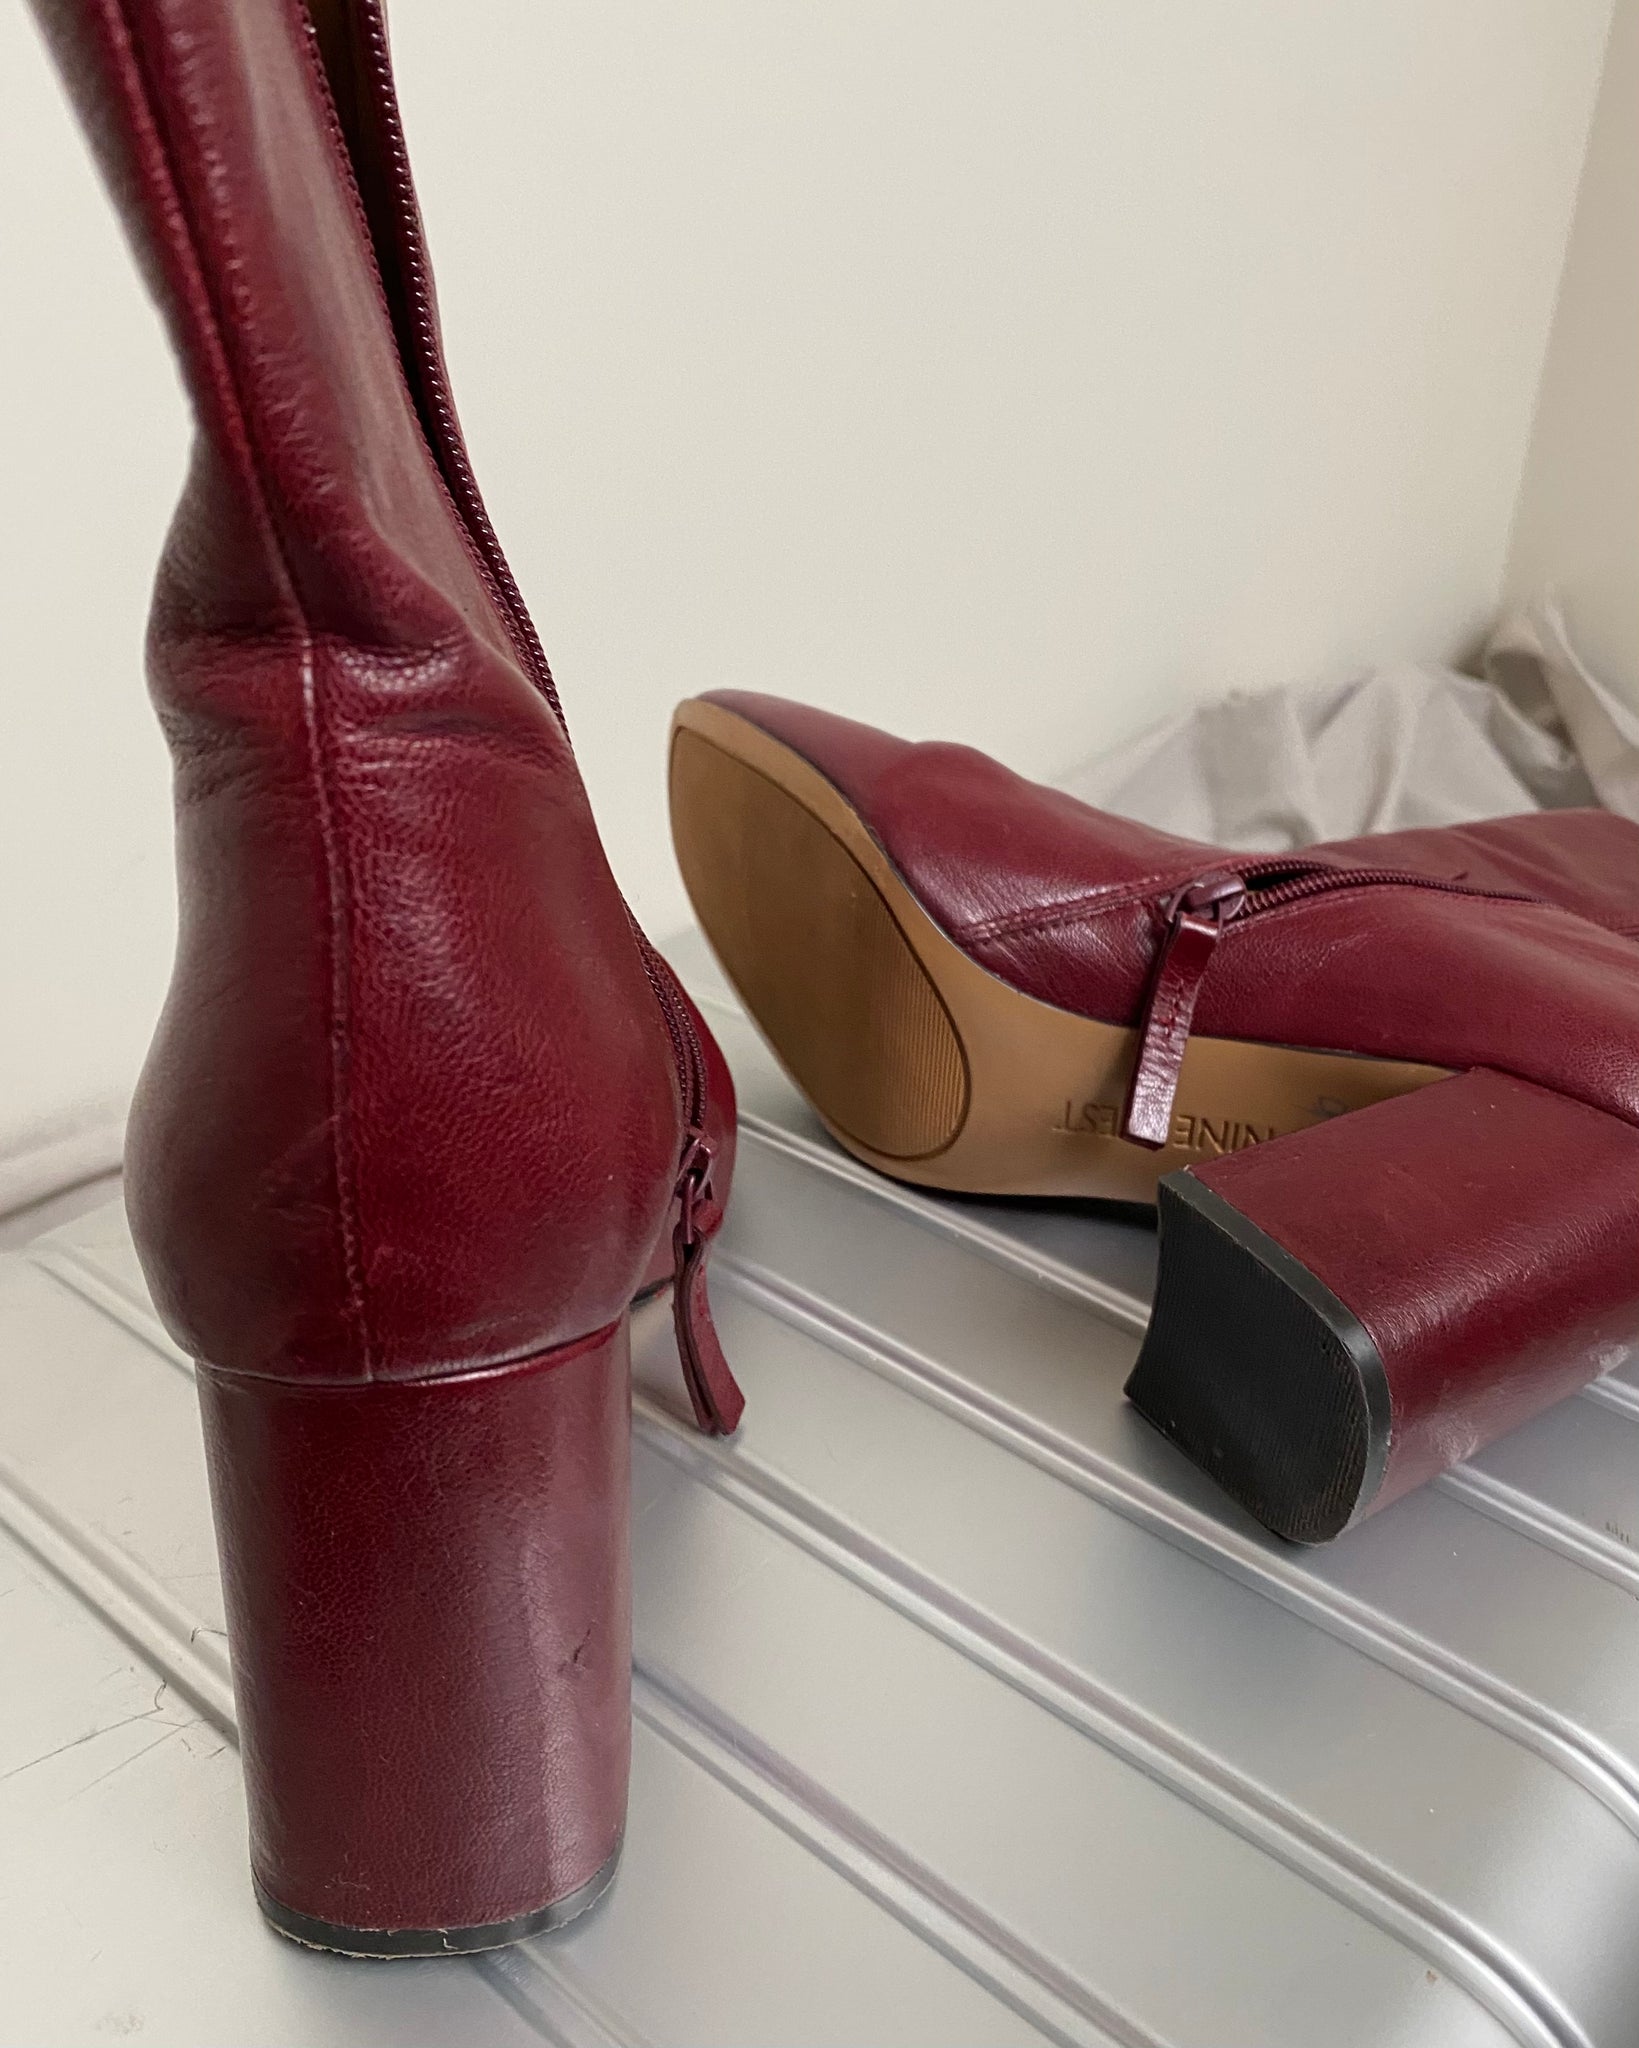 Burgundy Leather Heeled Boots (size 8.5)